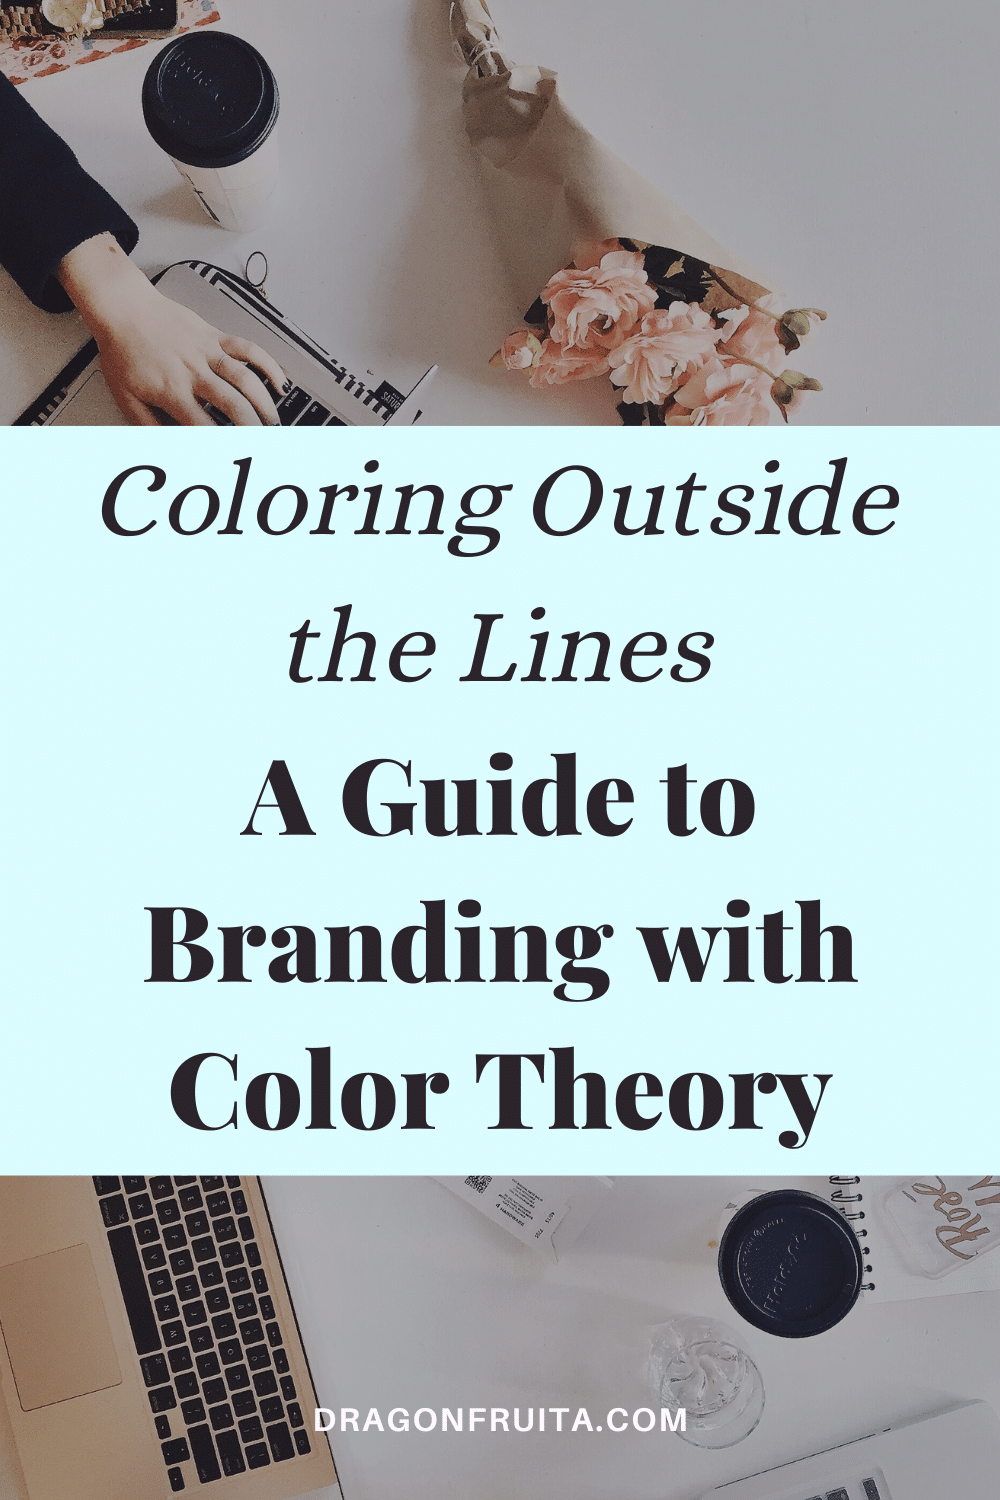 a guide to branding with color theory